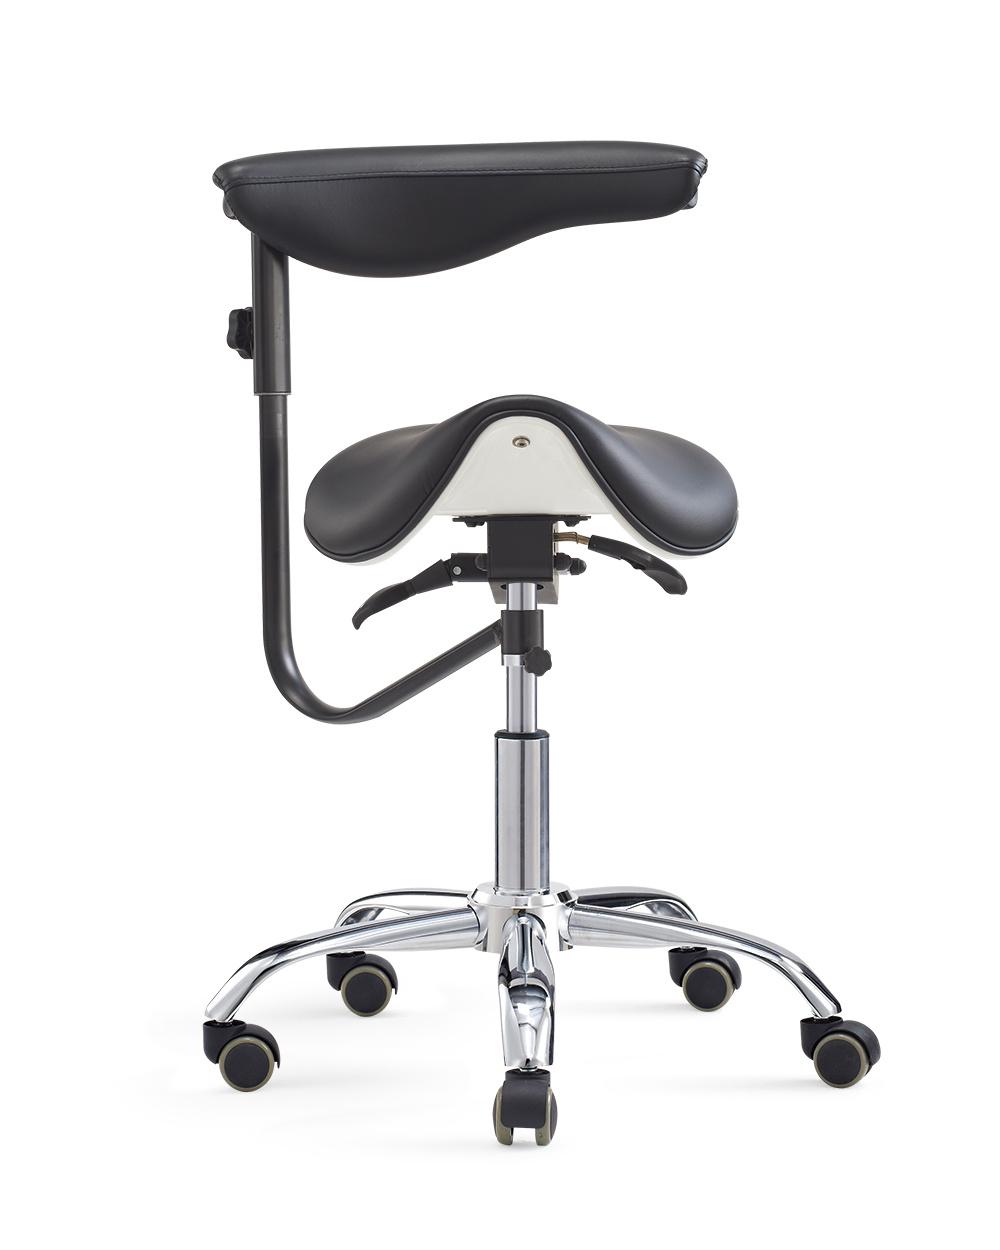 New and Best Selling Plywood Saddle Stool Office Chair